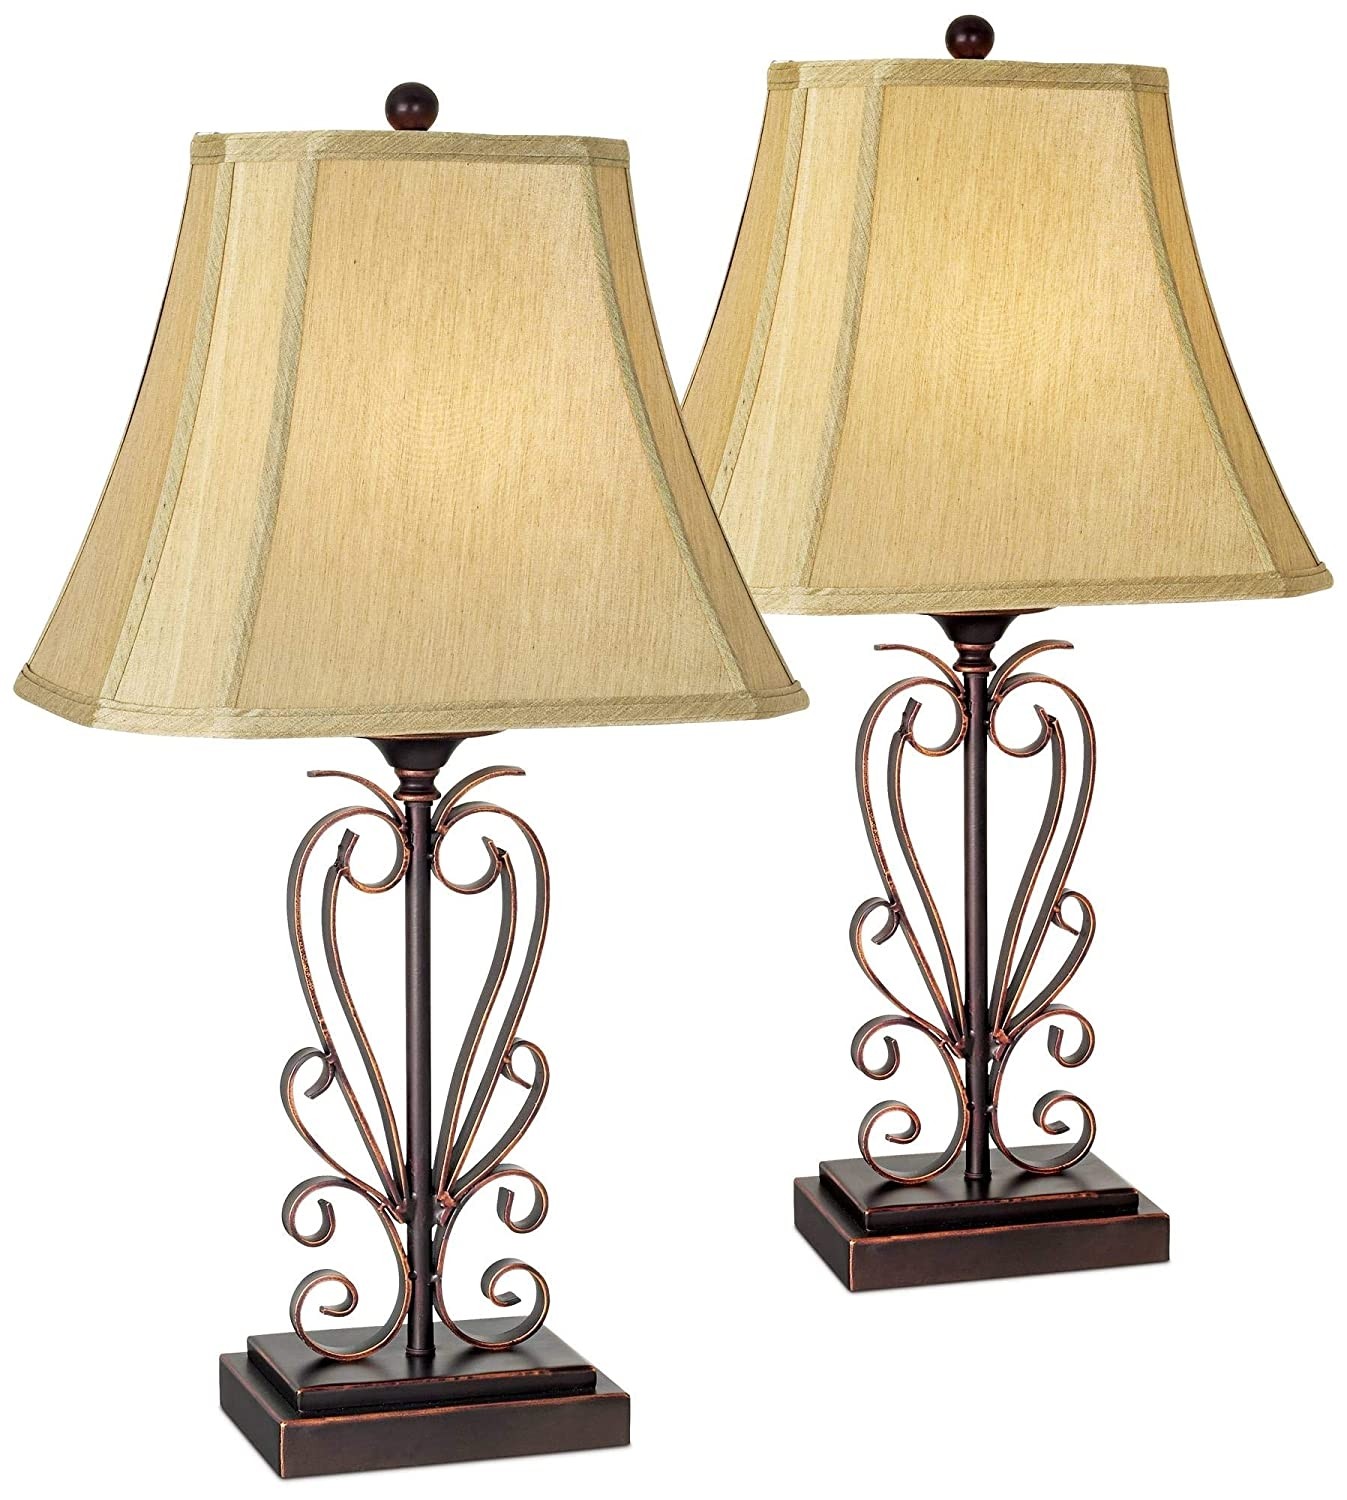 Best black wrought iron and glass table lamps your house